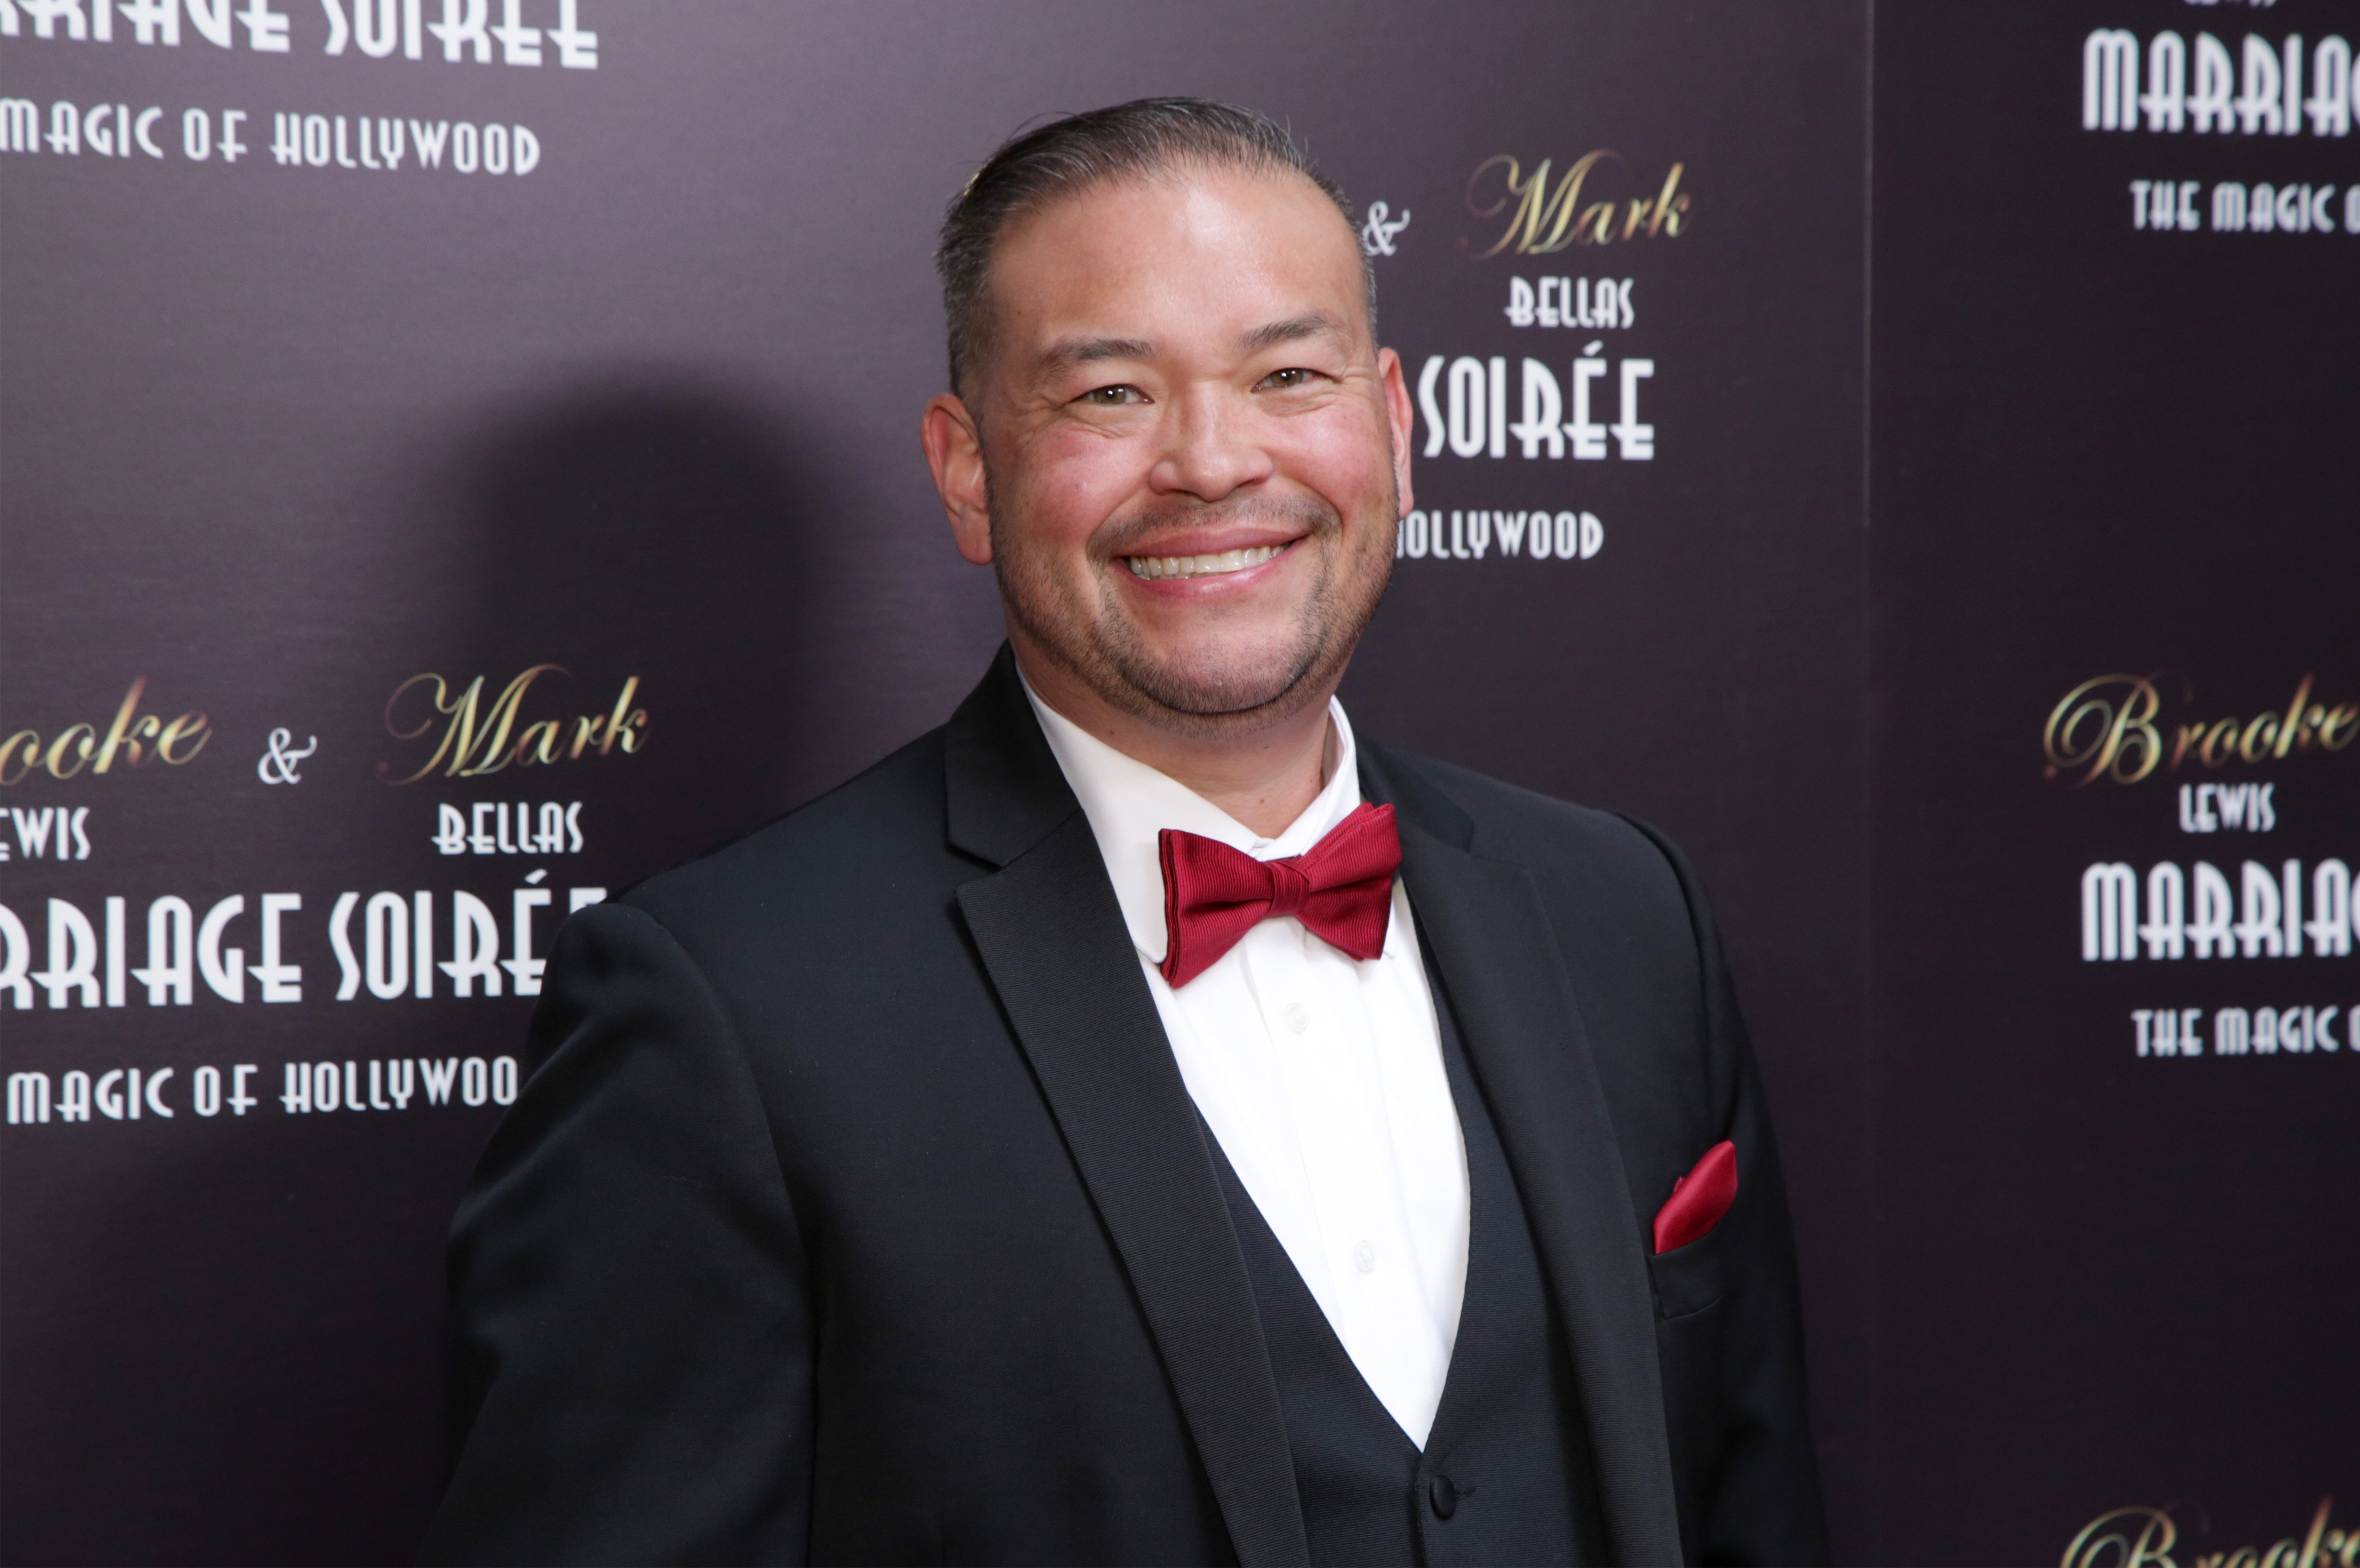 Jon Gosselin attends Brooke & Mark's Marriage Soiree "The Magic Of Hollywood" at the Houdini Estate on June 01, 2019 in Los Angeles, California. | Source: Getty Images